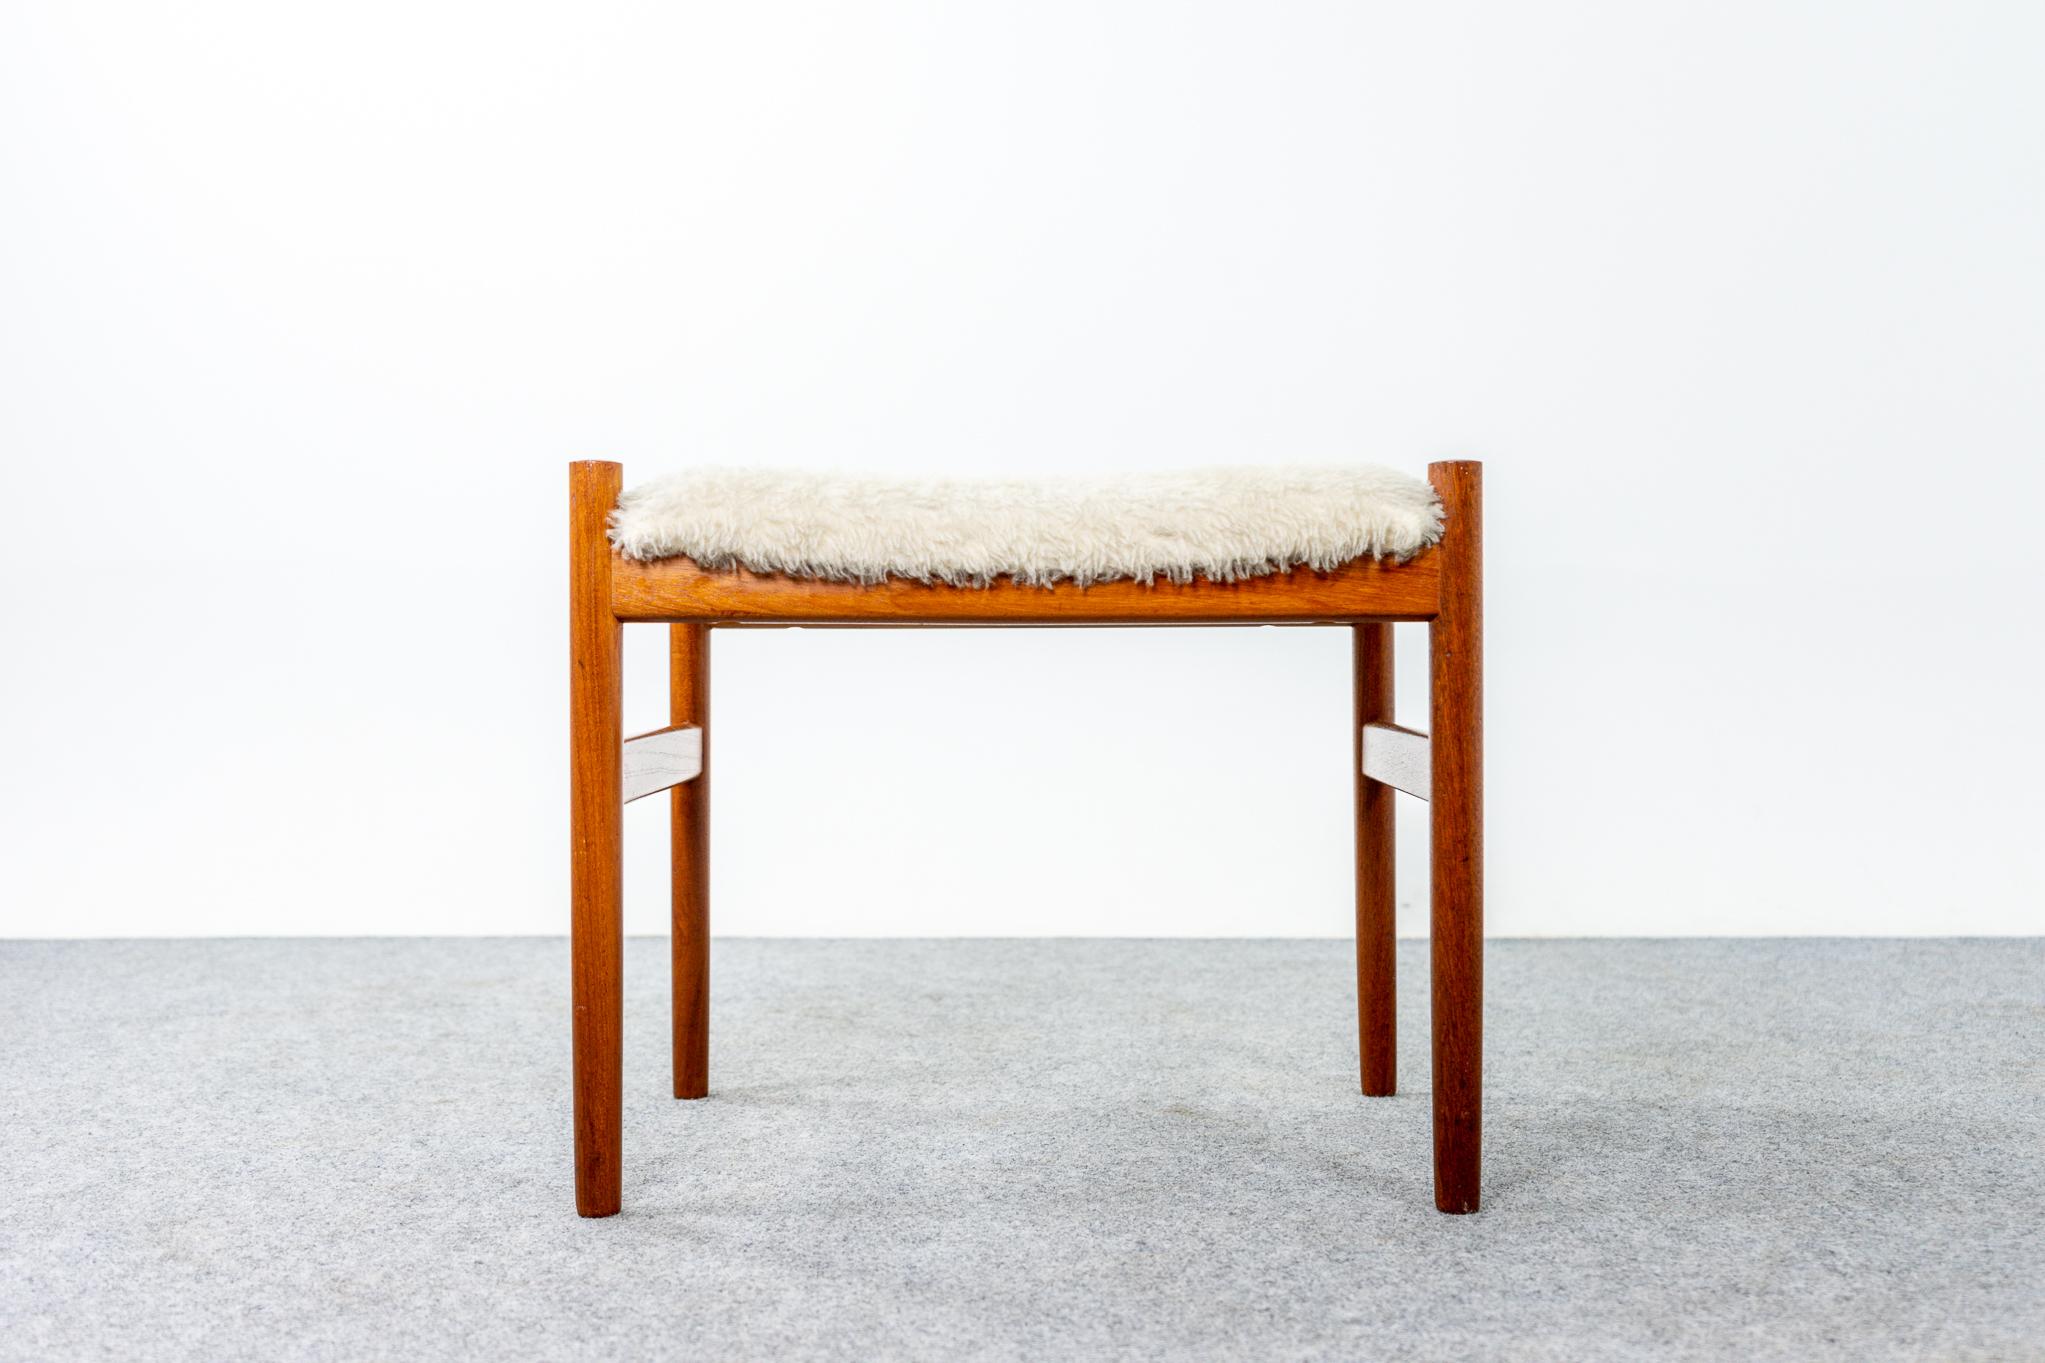 Teak and shearling footstool designed by Hugo Frandsen for Spottrup, circa 1960's. Compact design, can be used with virtually any seating type, easy to move around the home too! Underside of chair shows Spottrup makers' mark.

Unrestored item,